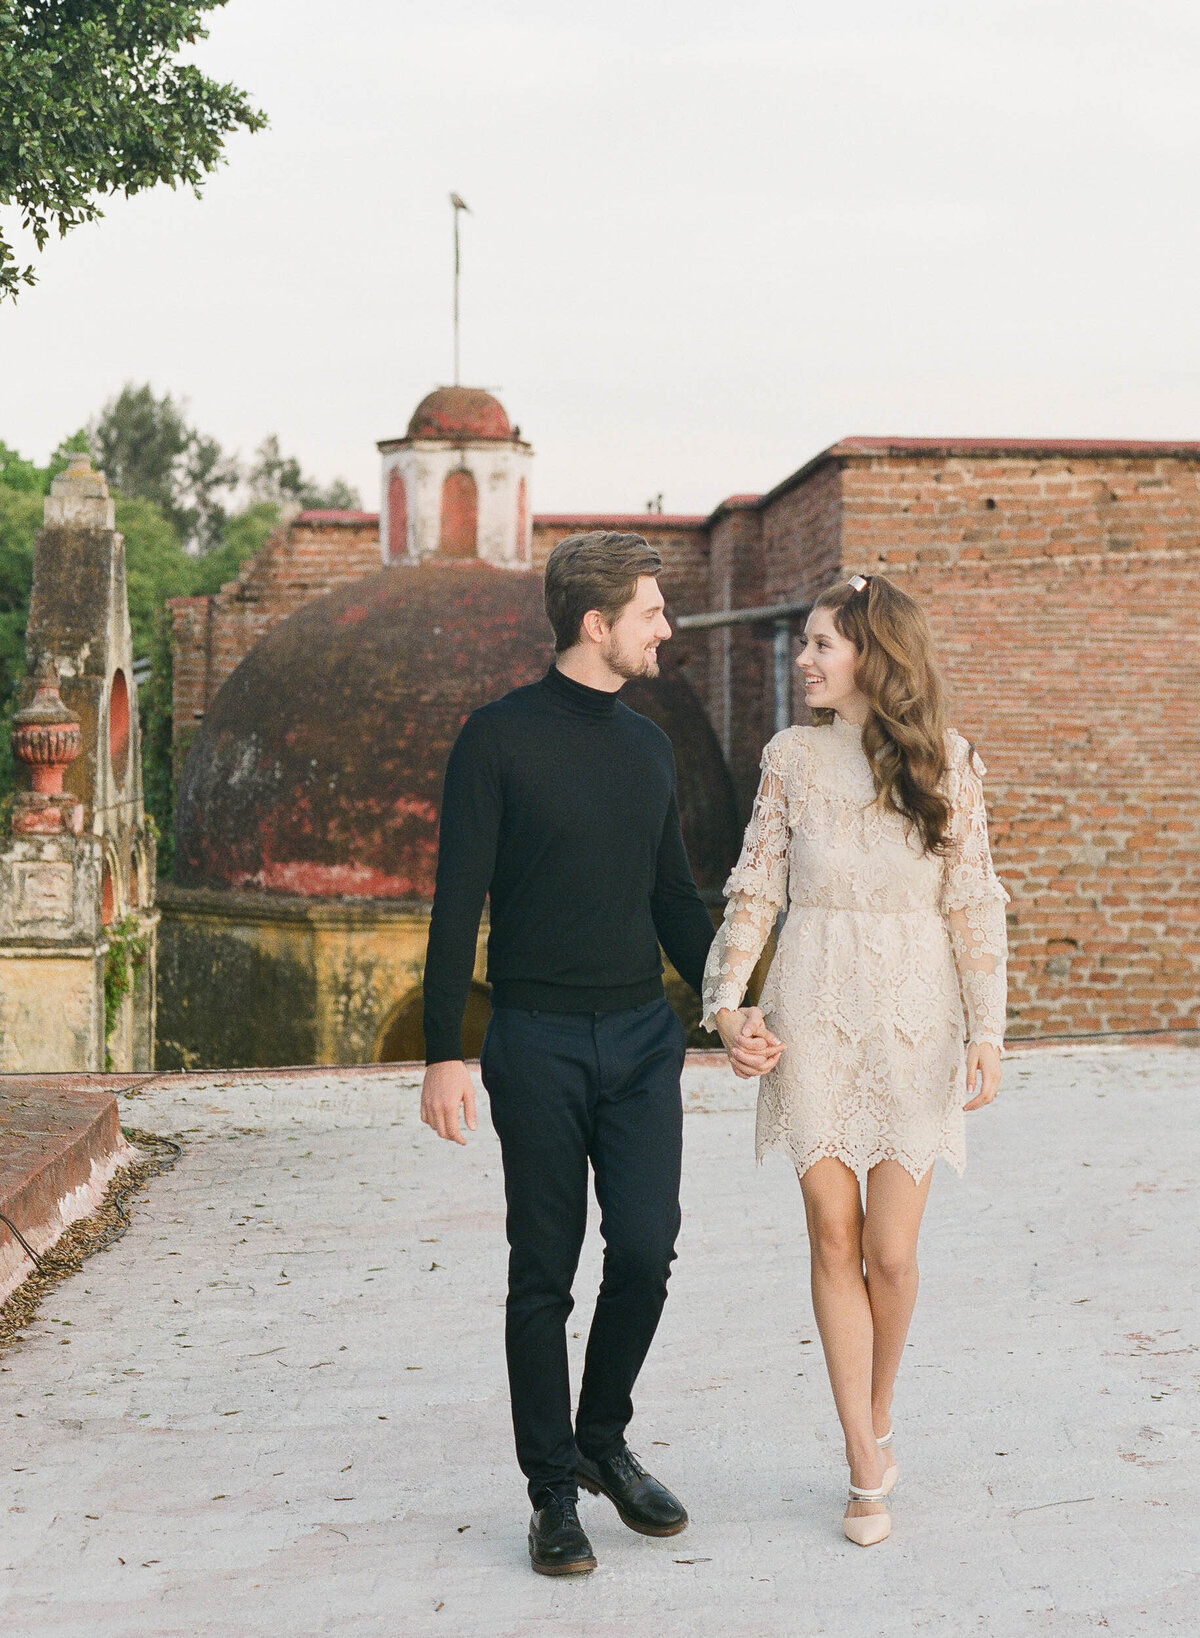 Alexandra-Vonk-photography-engagement-session-Mexico-15